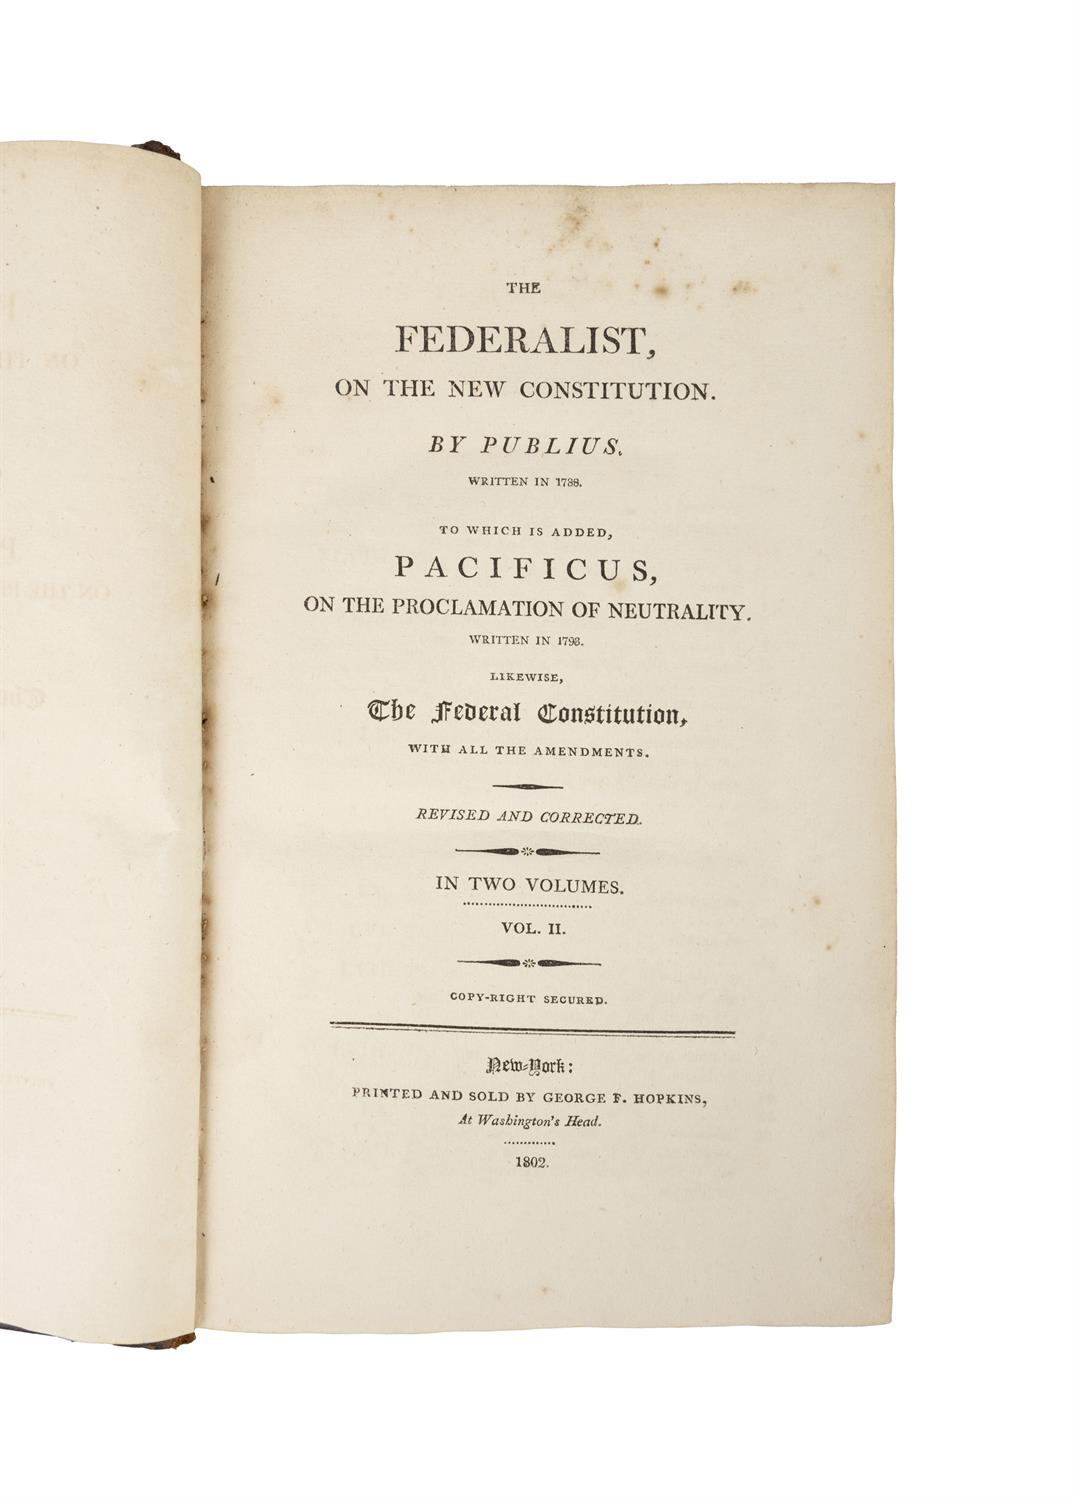 ANDREW HAMILTON, JOHN JAY, JAMES MADISON The Federalist on the New Constitution by Publius. - Image 3 of 4